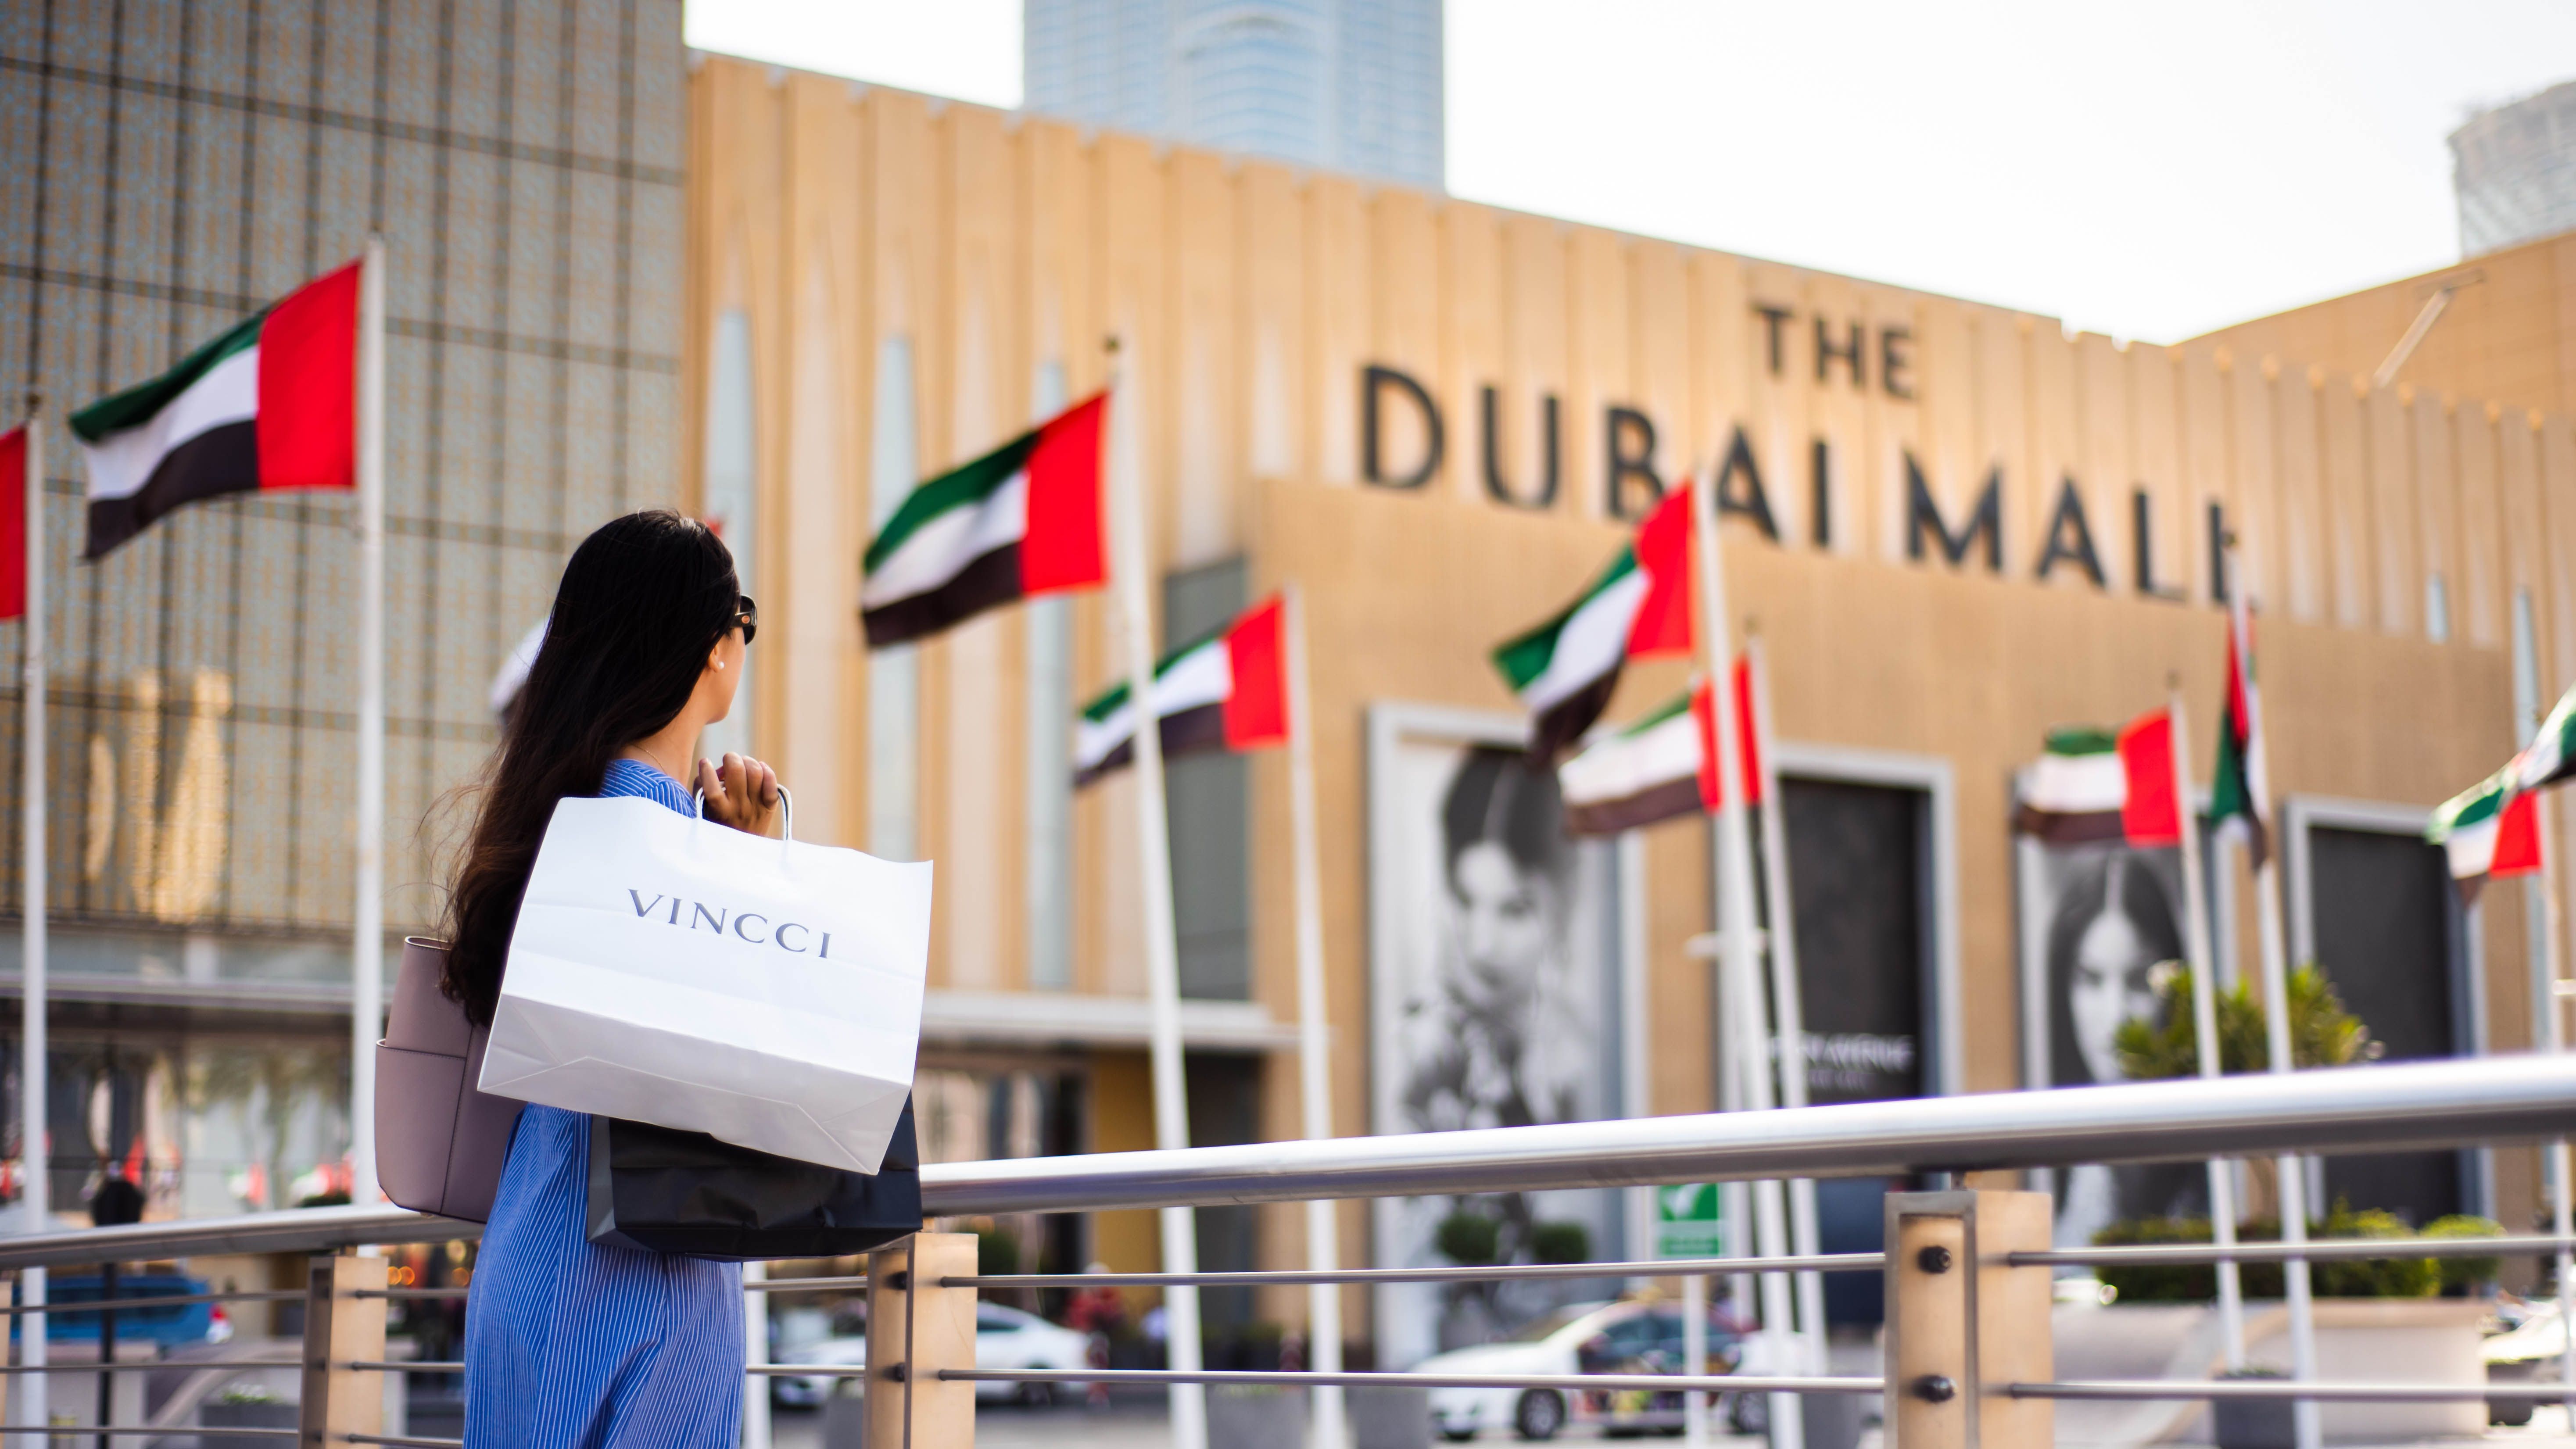 Chinese wealth shifts to Dubai as business opportunities boom